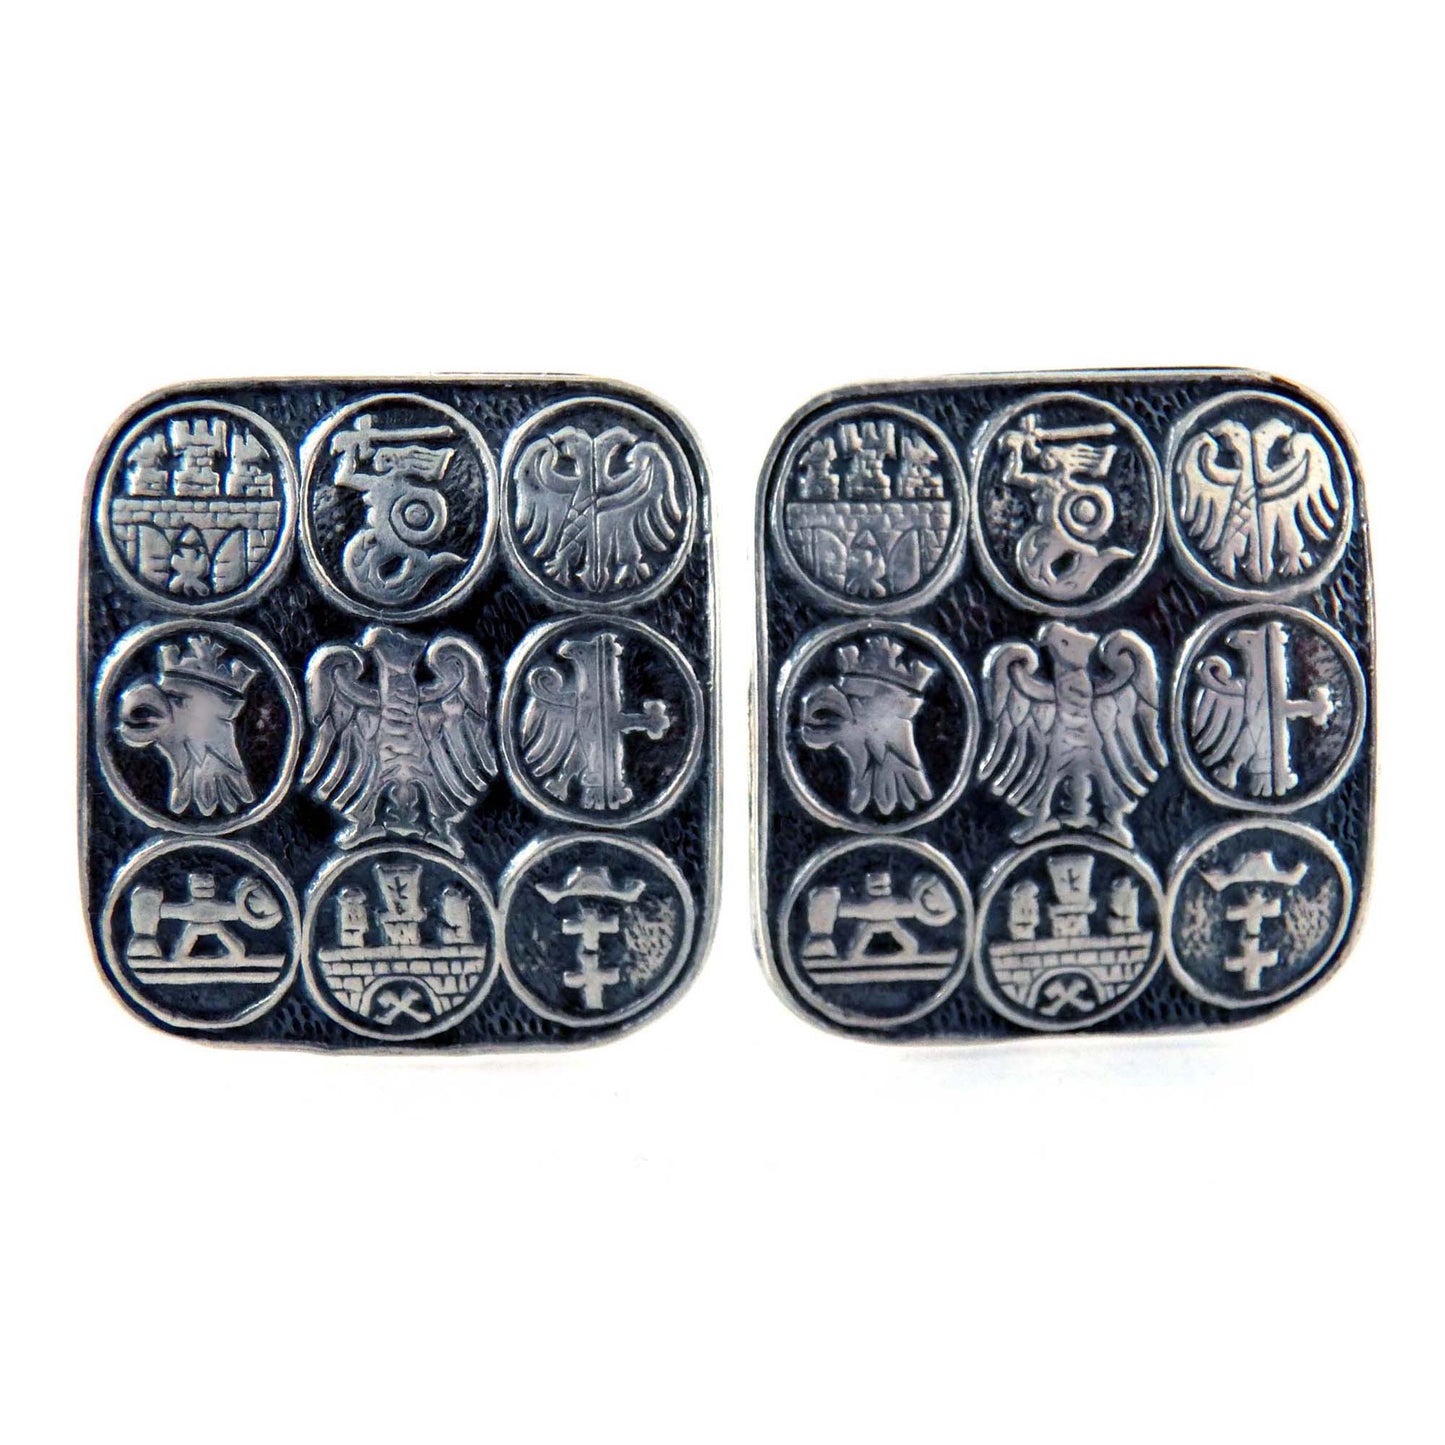 Polish towns coat of arms cufflinks.